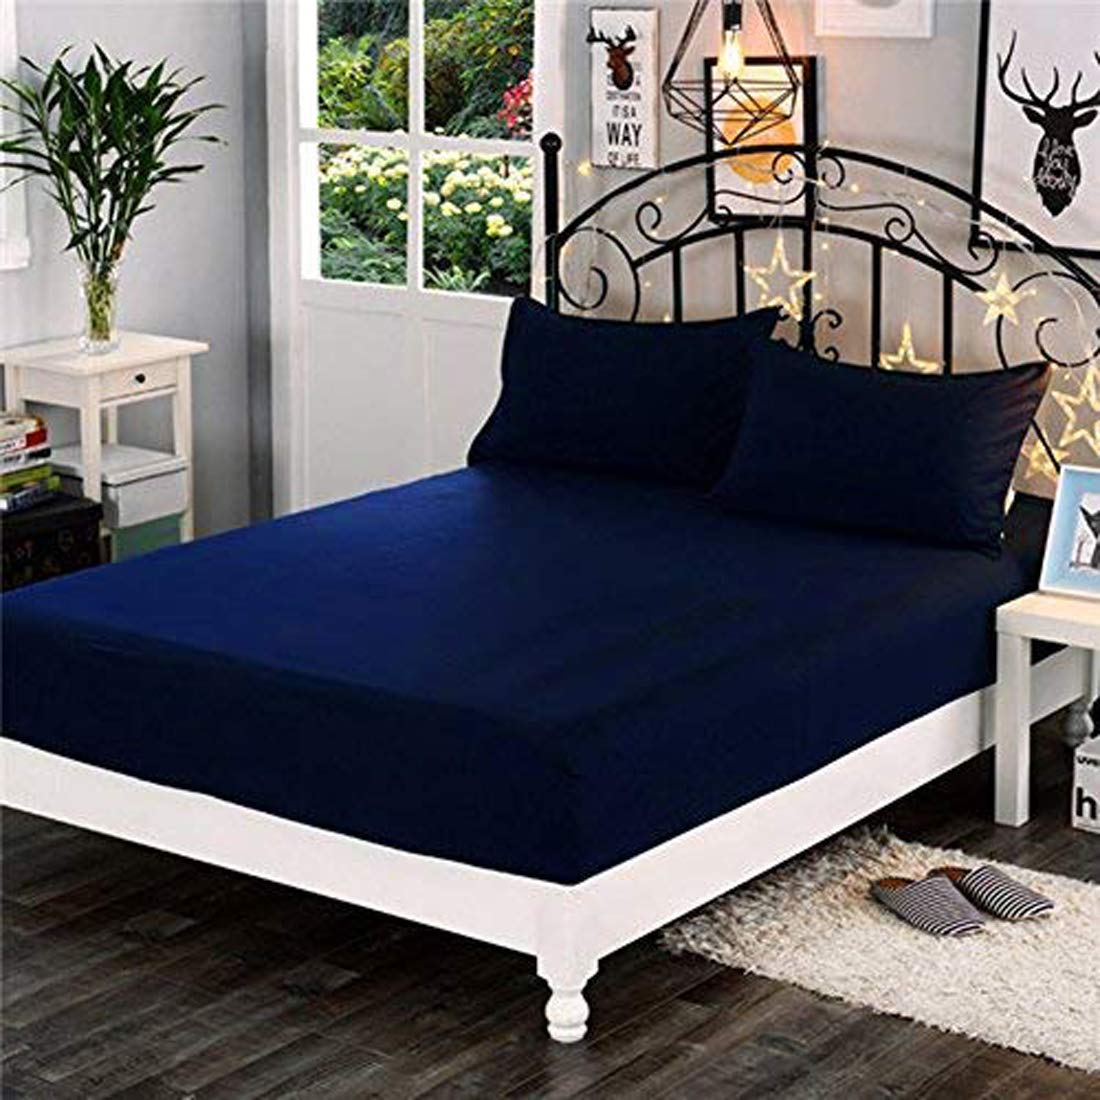 100% Waterproof Terry Cotton Fitted Mattress Protector for King Size Bed (78 x 72 Inch, Blue)